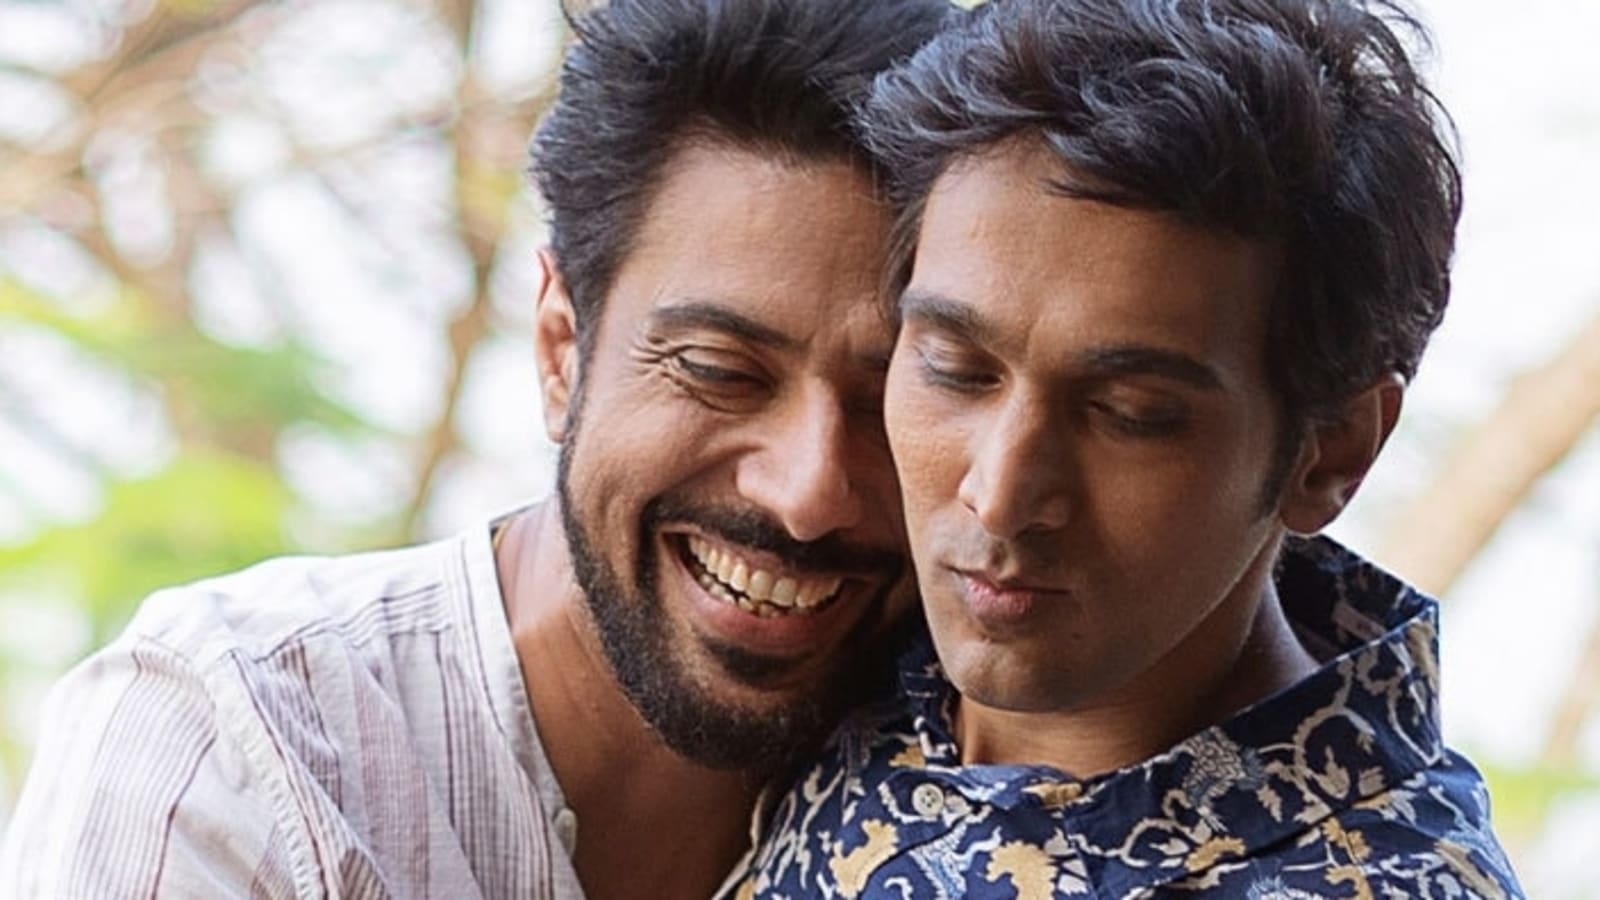 Indian Gay Force Sex - Modern Love Mumbai episode on gay love missing from Amazon Prime Video in  UAE | Web Series - Hindustan Times